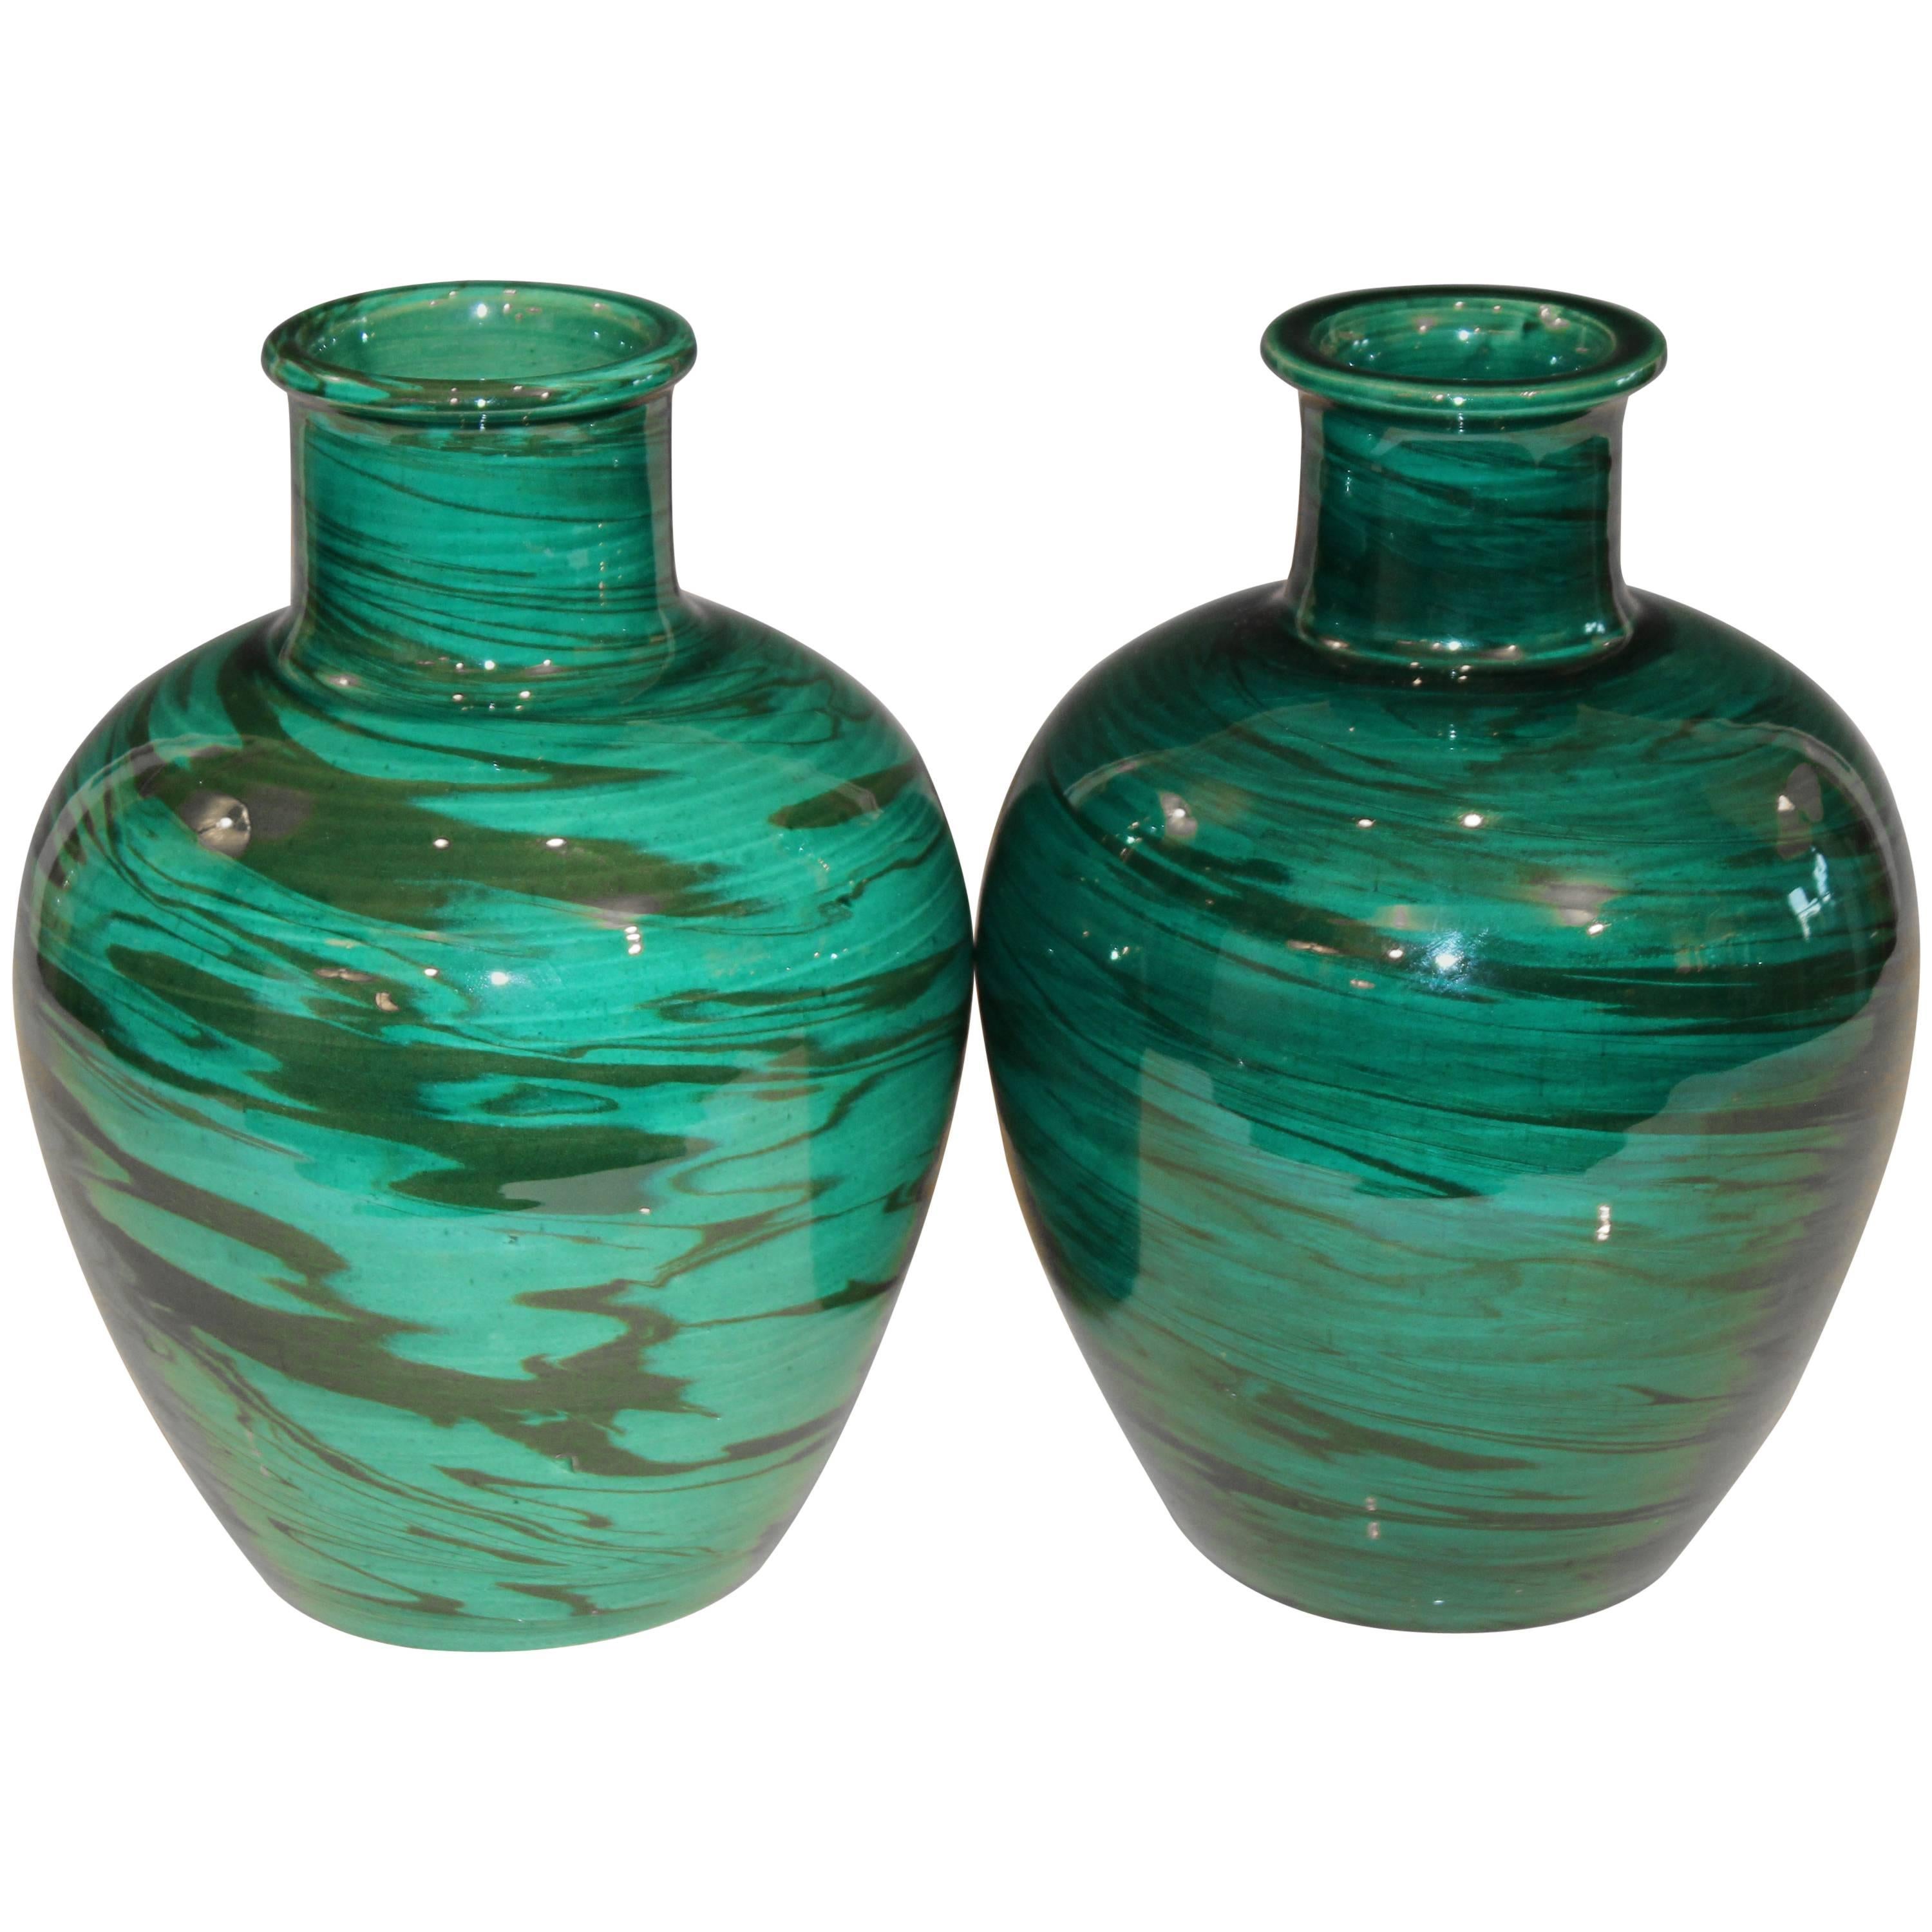 Bitossi MCM Raymor Vintage Italian Pottery Marbled Green Marbleized Vases, Pair For Sale